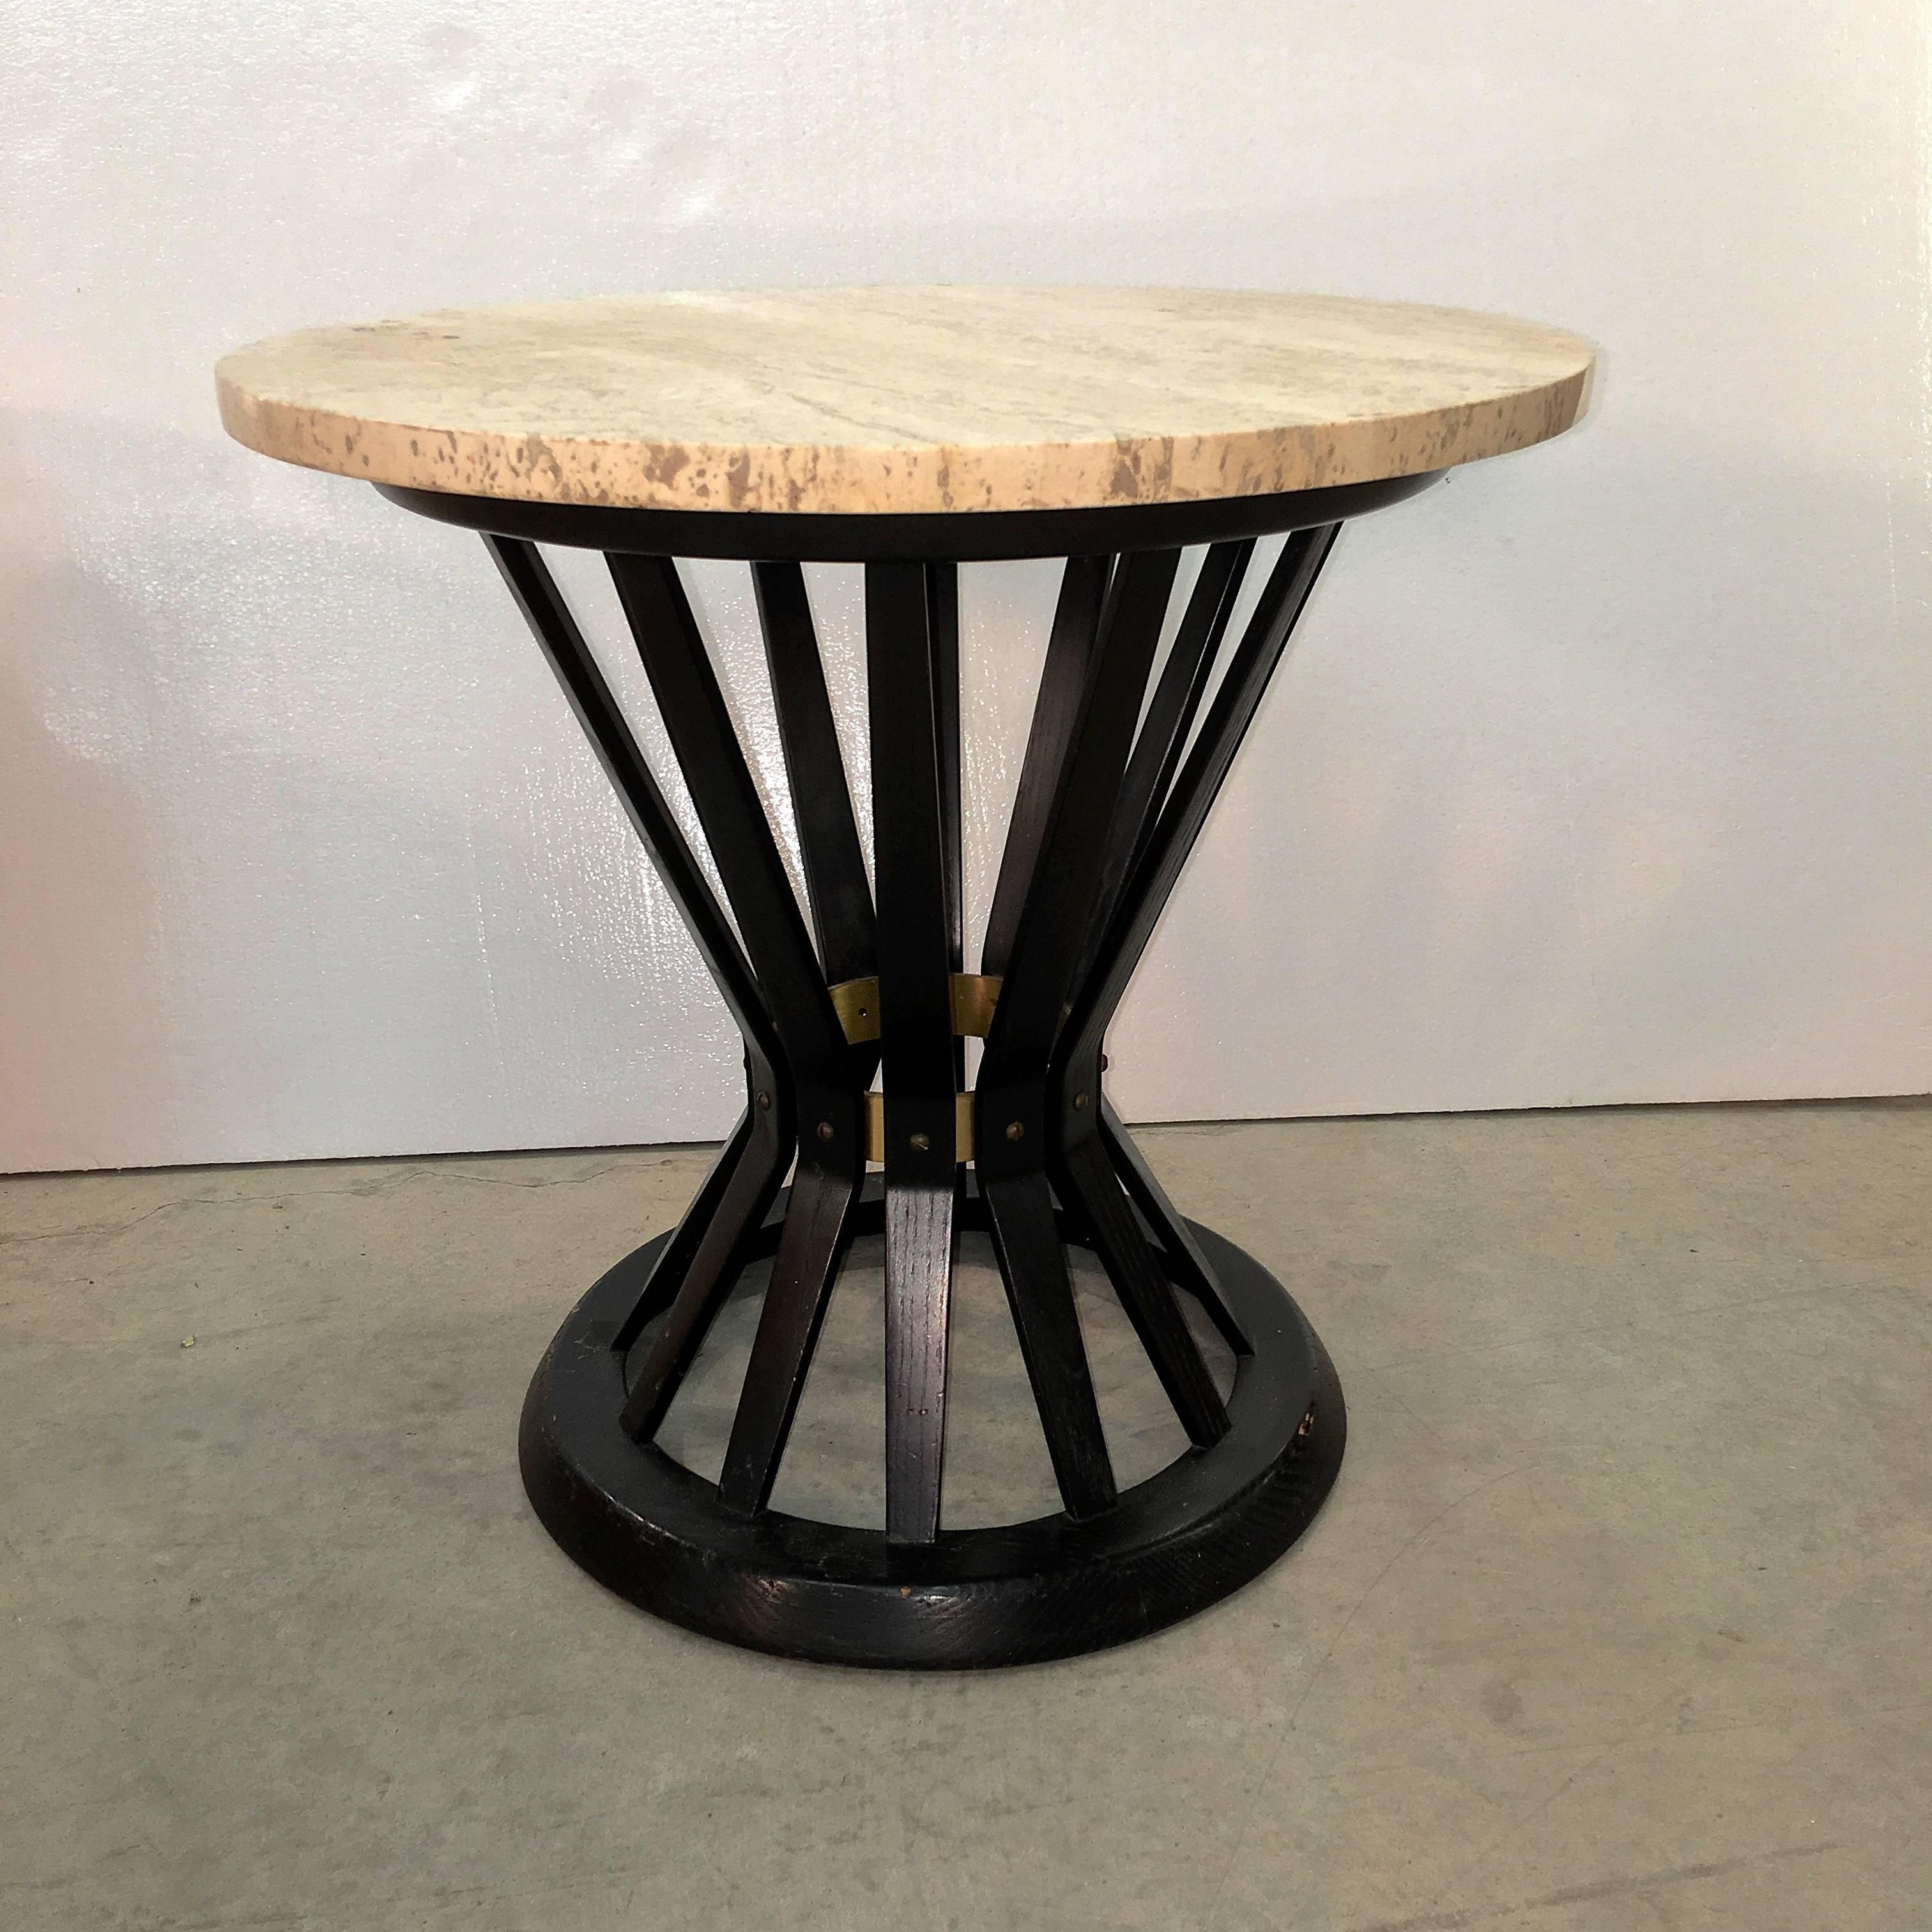 Mid-Century Modern Edward Wormley for Dunbar Wheat Sheaf Occasional Table with Travertine Top